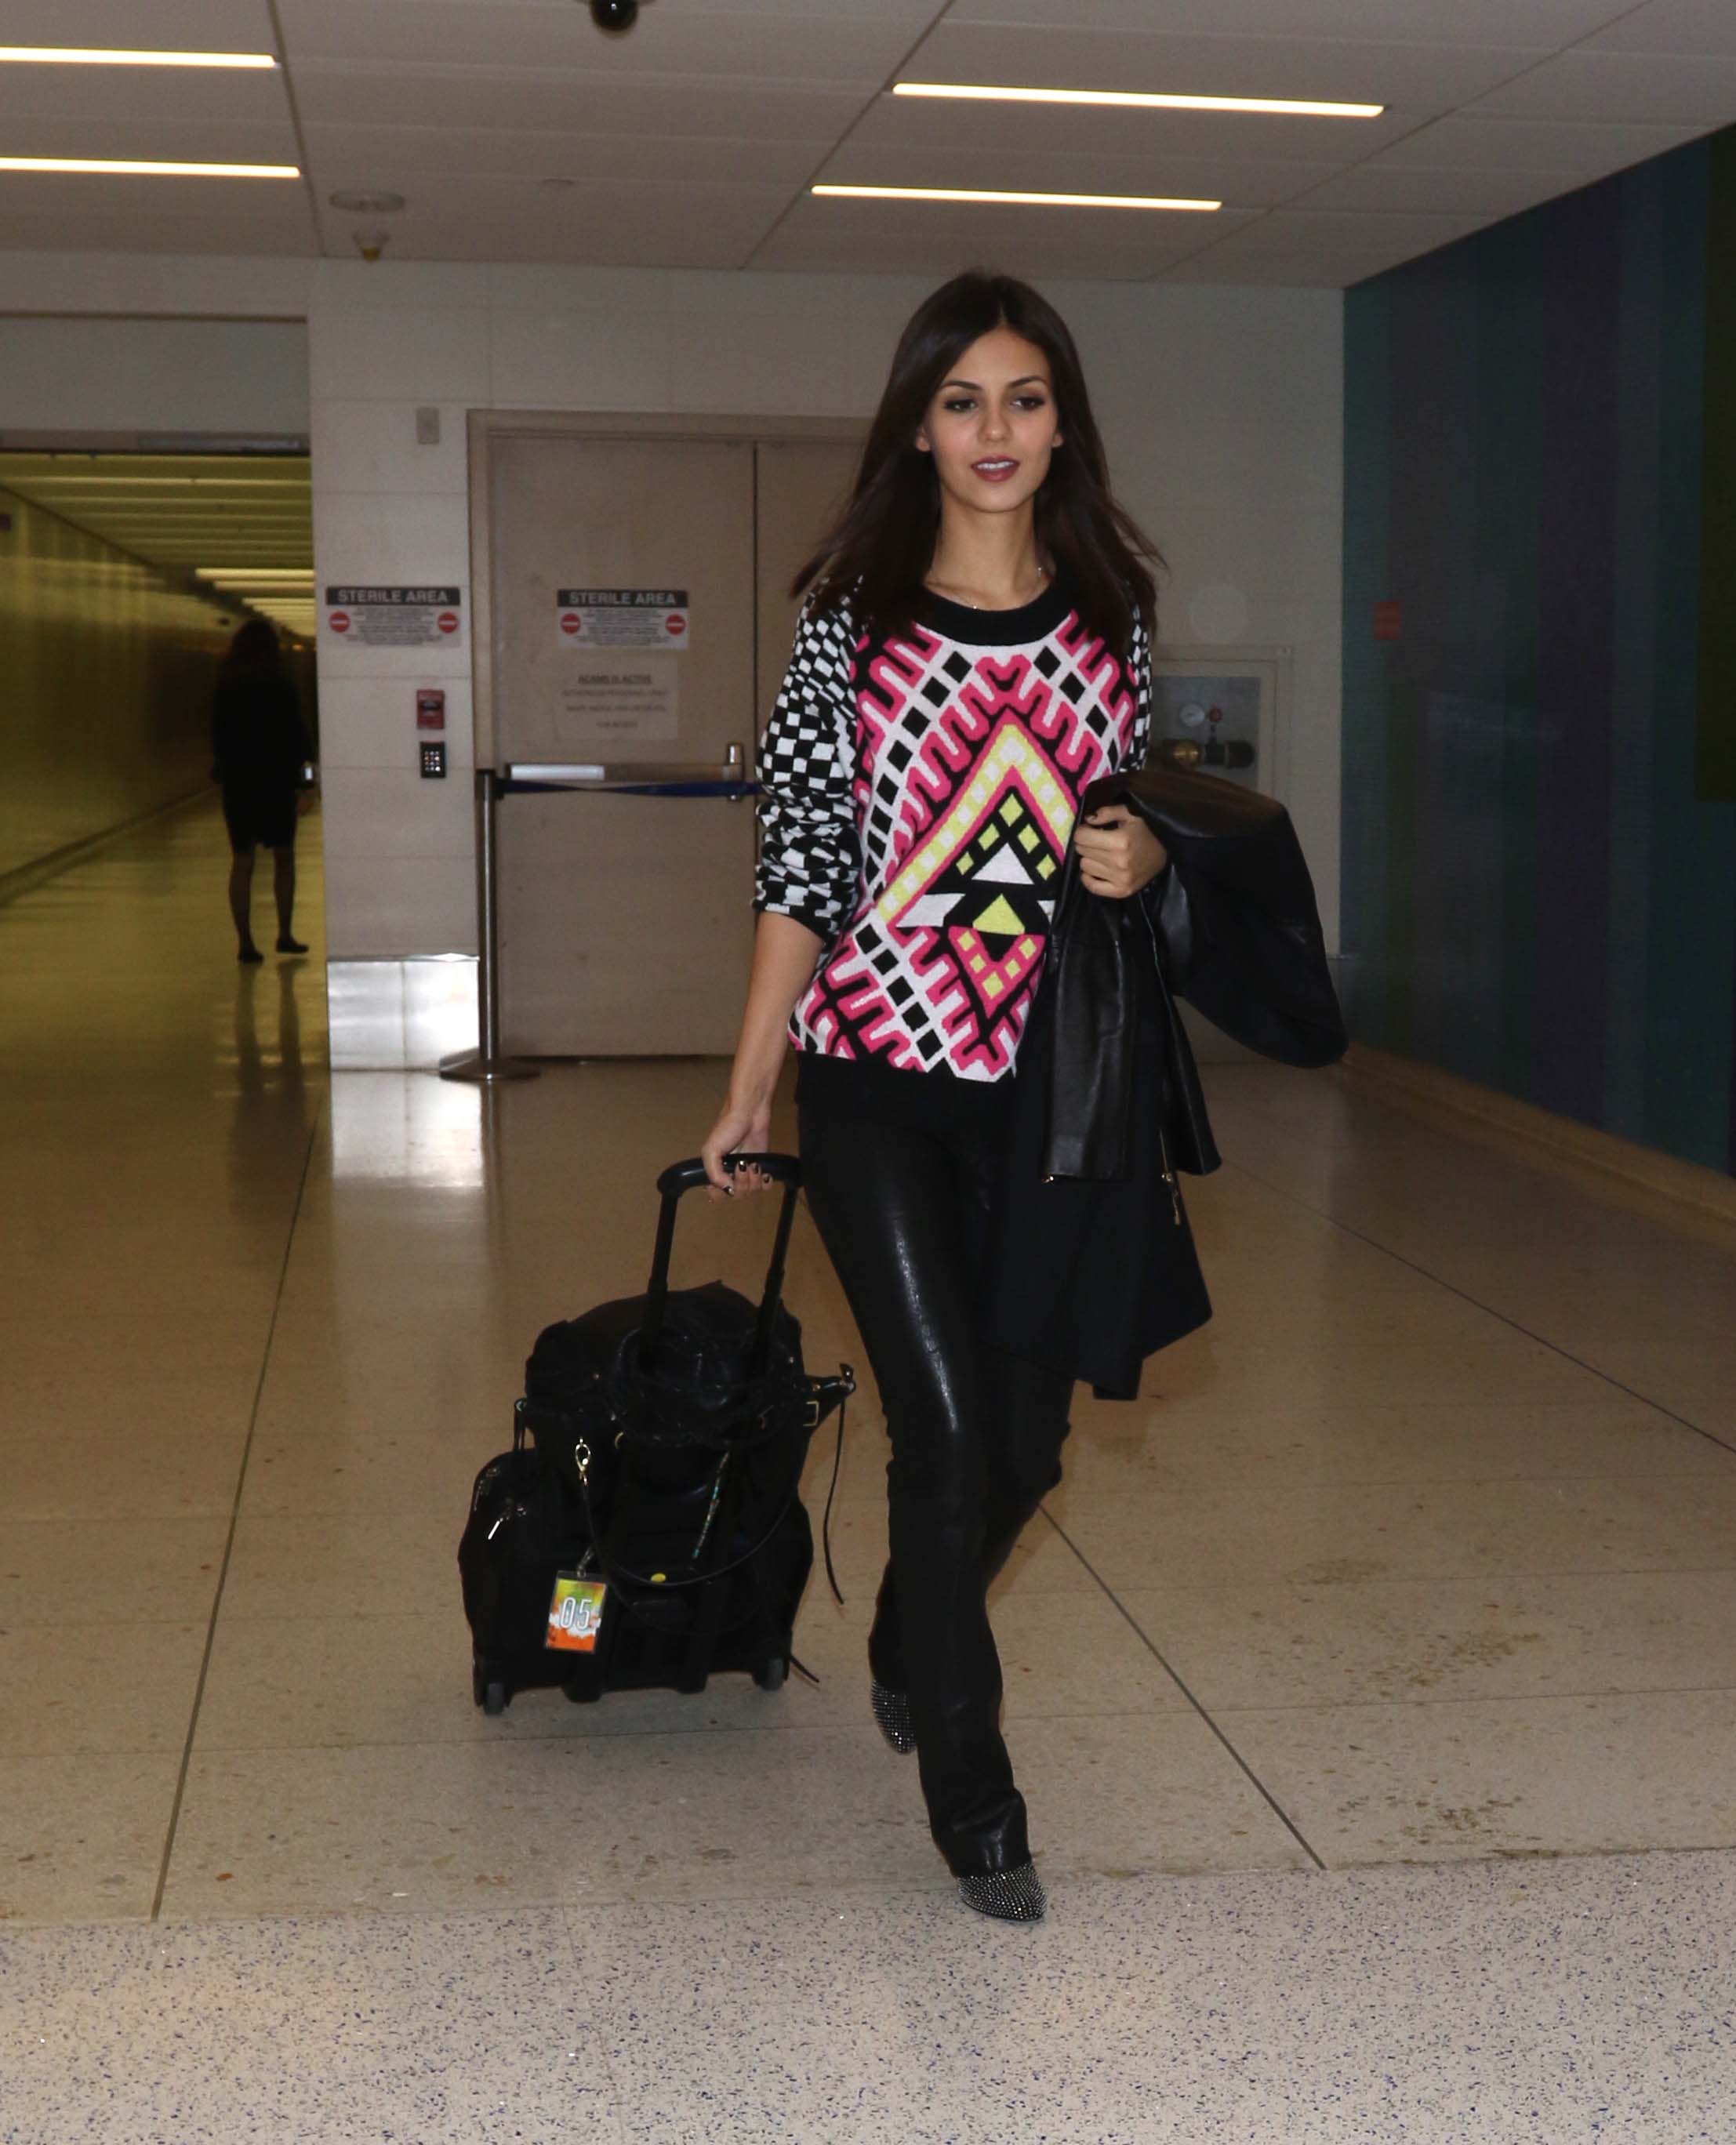 Victoria Justice at LAX airport arrival